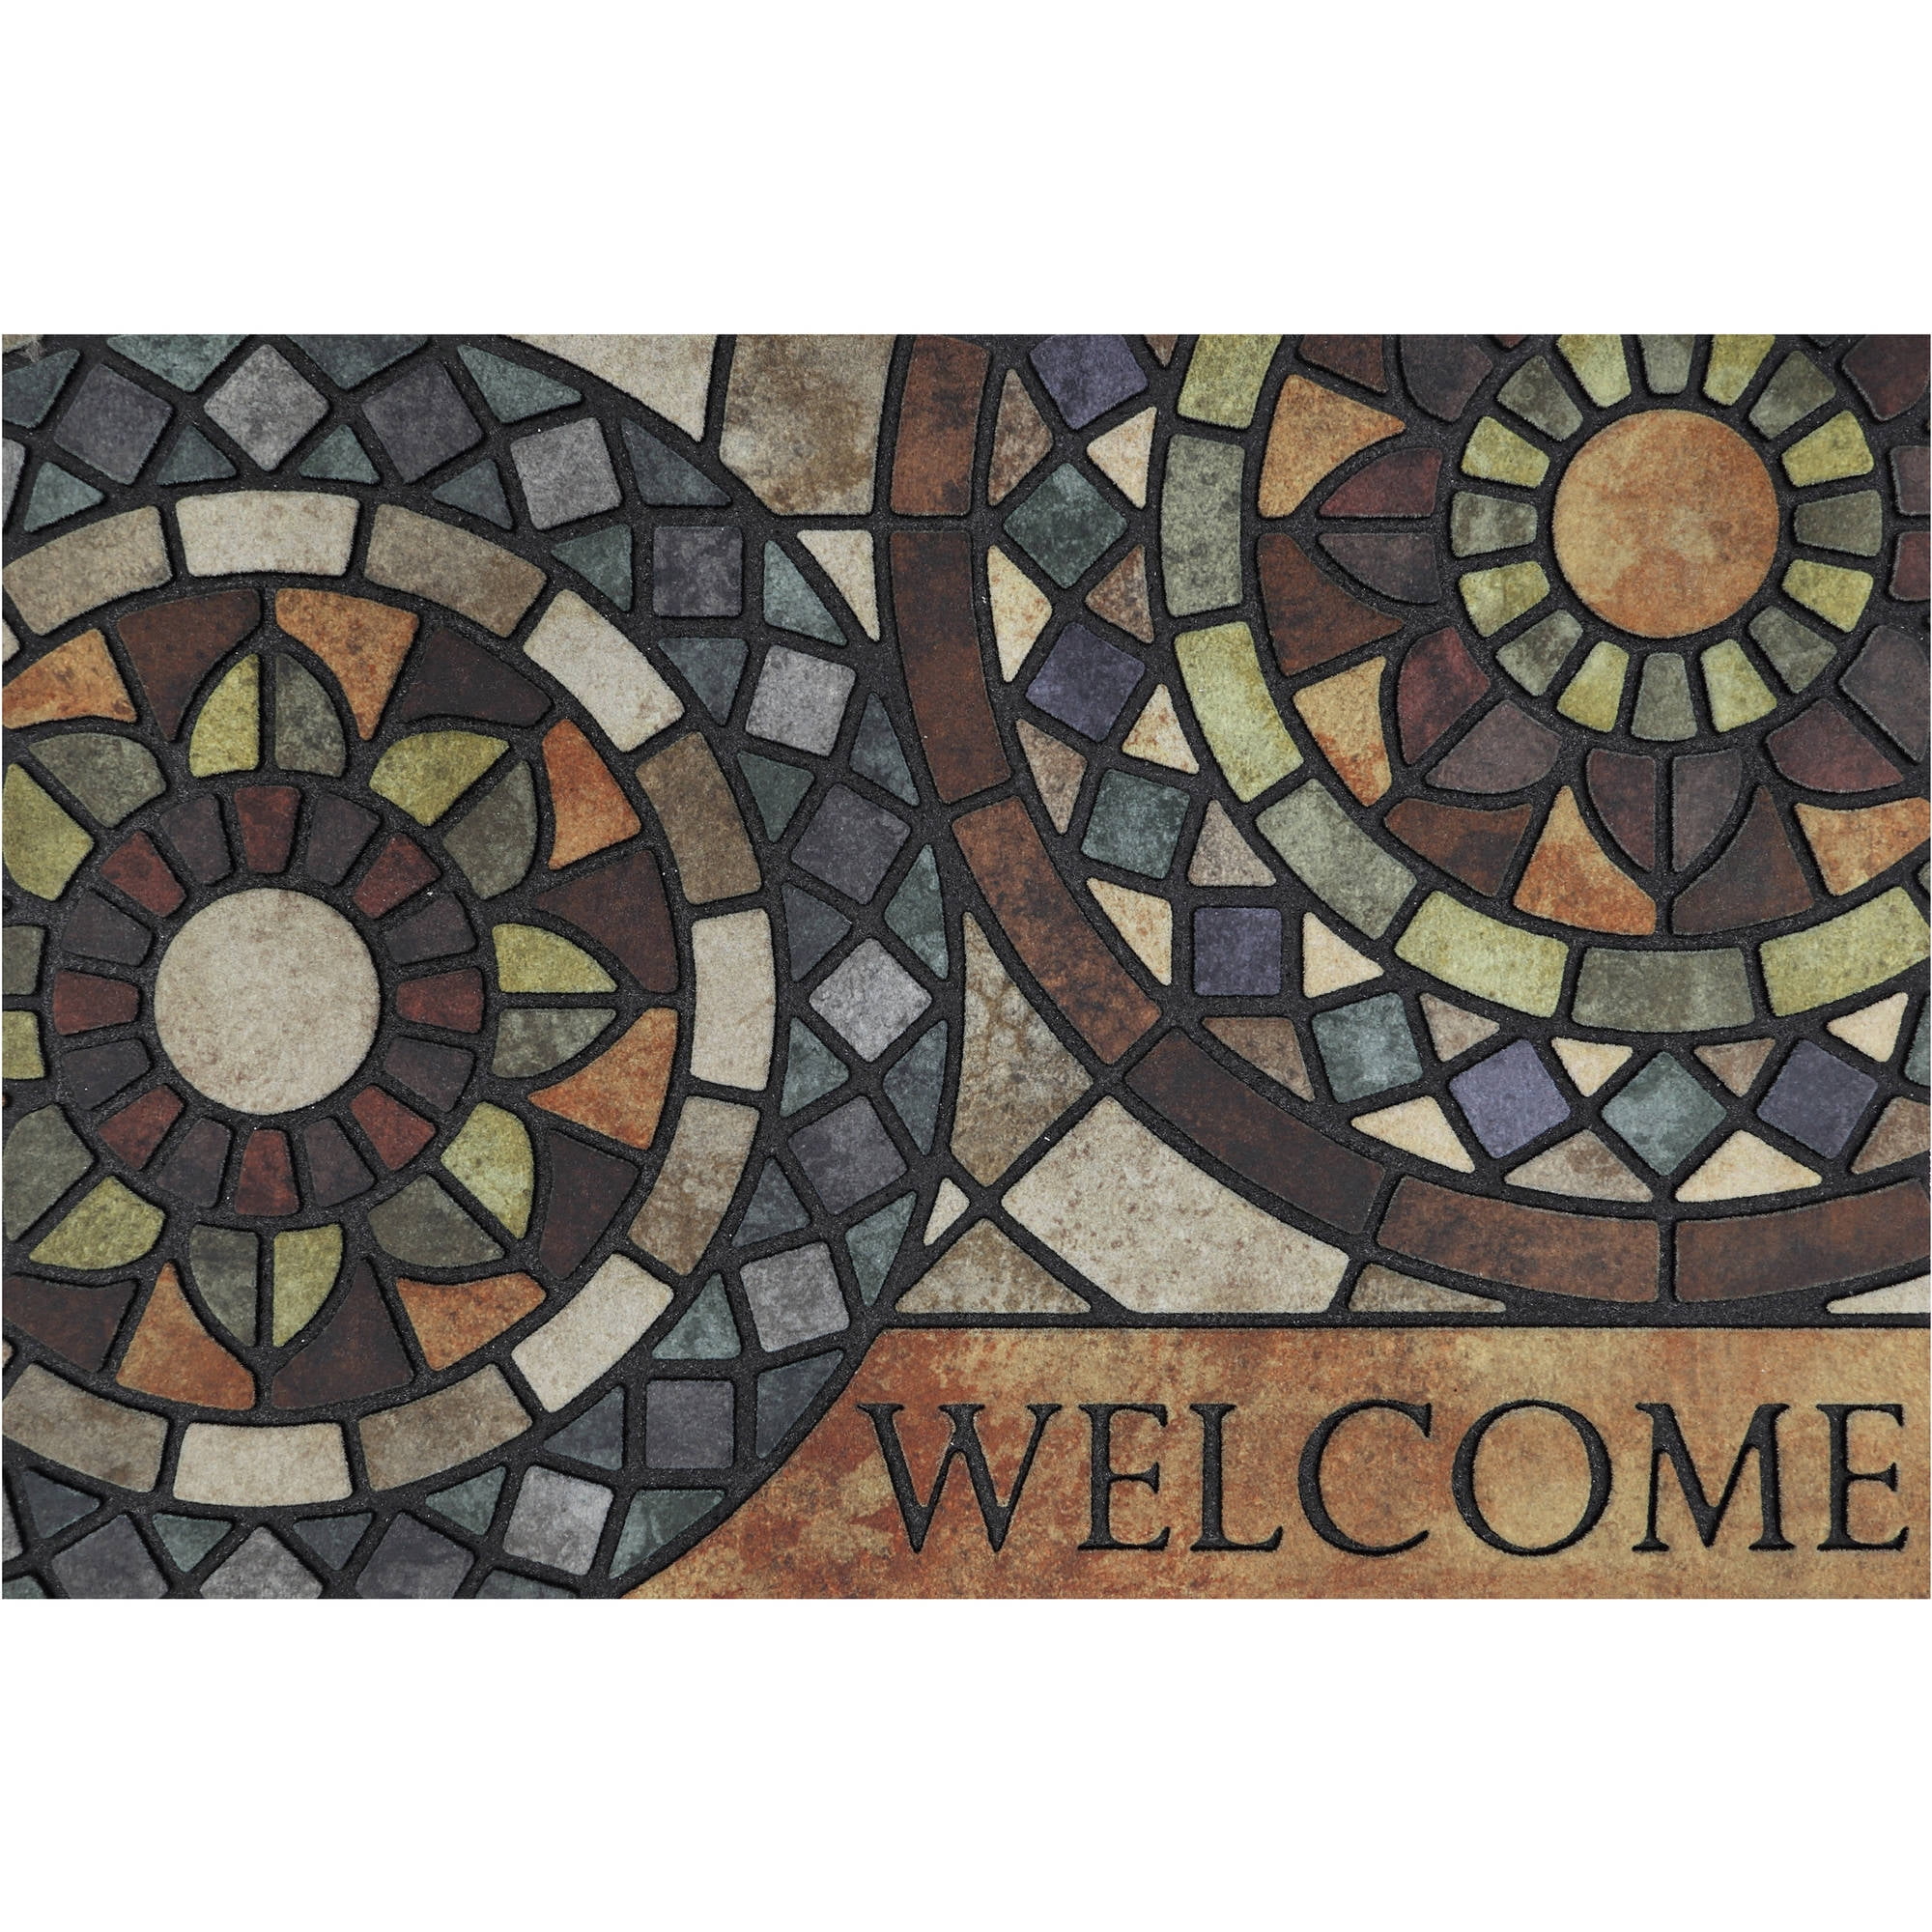 18 x 30 Inches Studio M MatMates Pilgrim Turkey Fall Thanksgiving Decorative Floor Mat Indoor or Outdoor Doormat with Eco-Friendly Recycled Rubber Backing